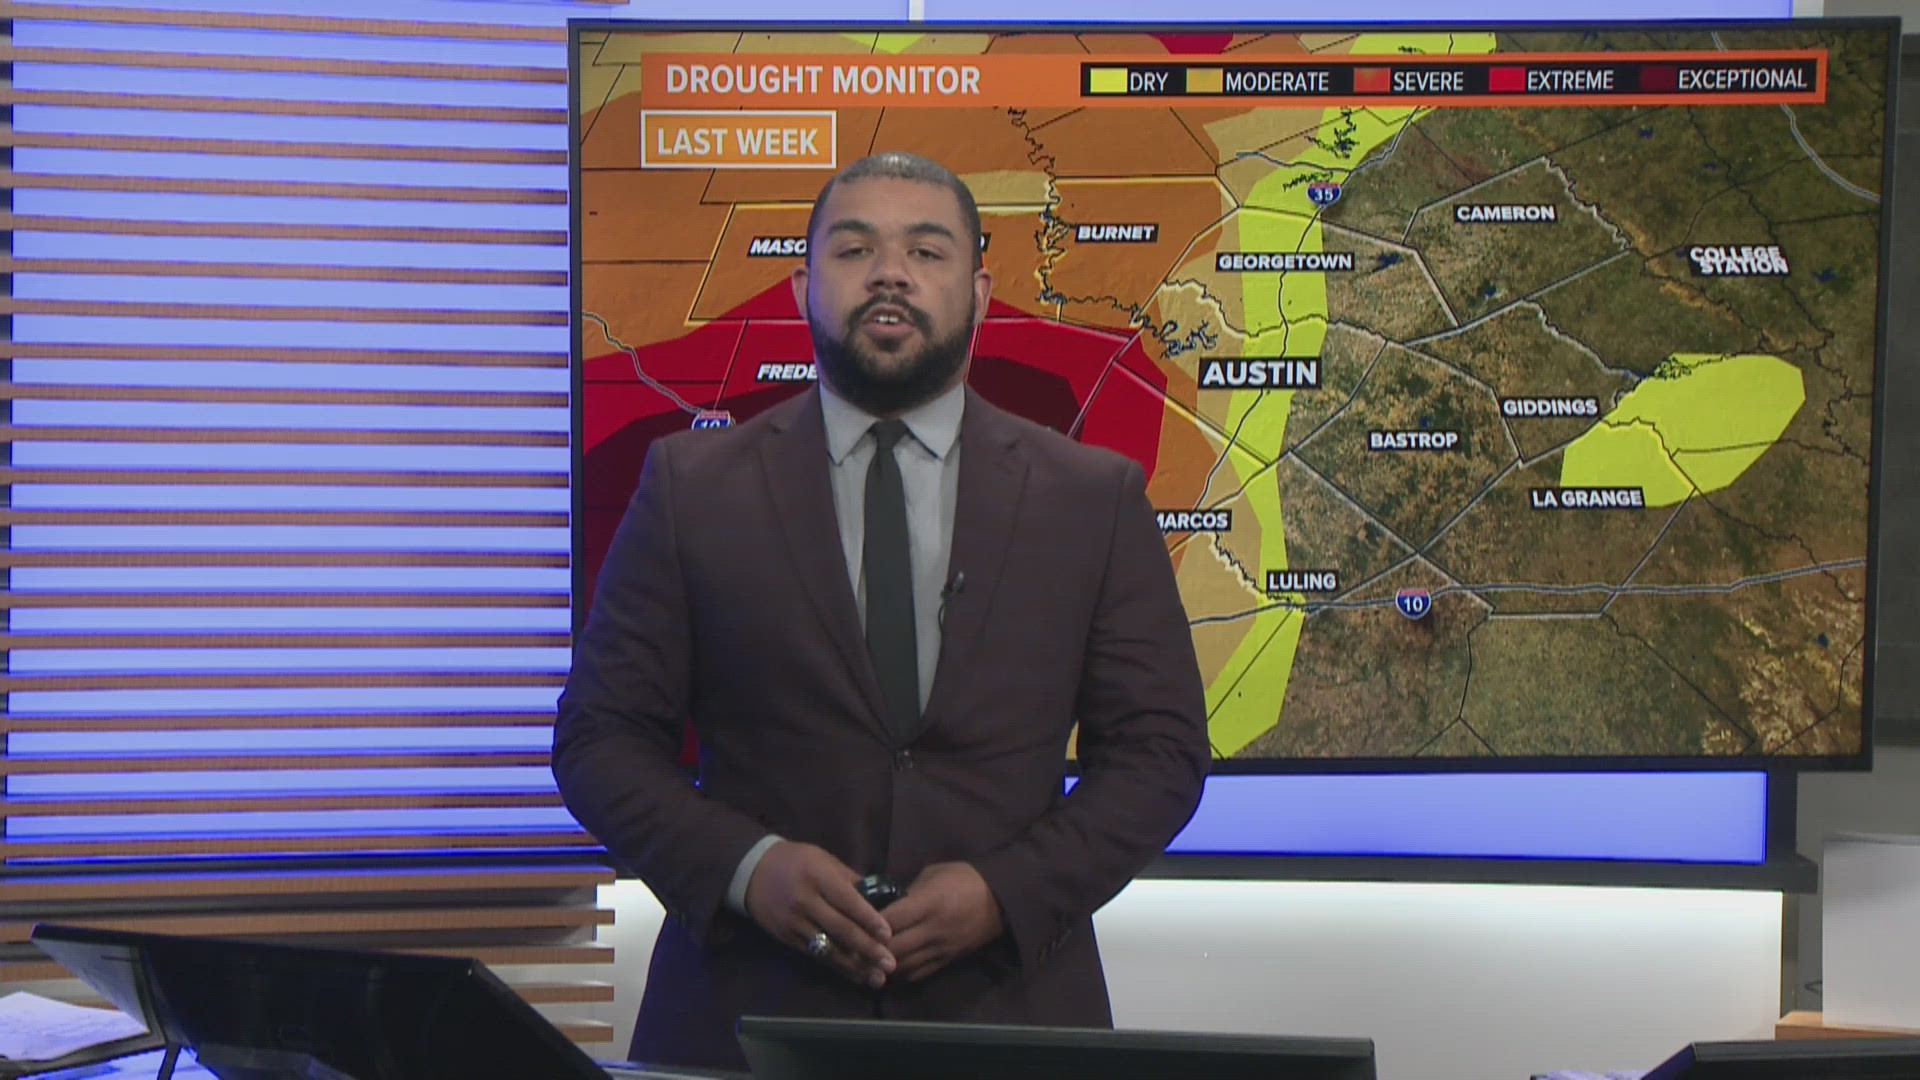 Significant drought improvements throughout Texas